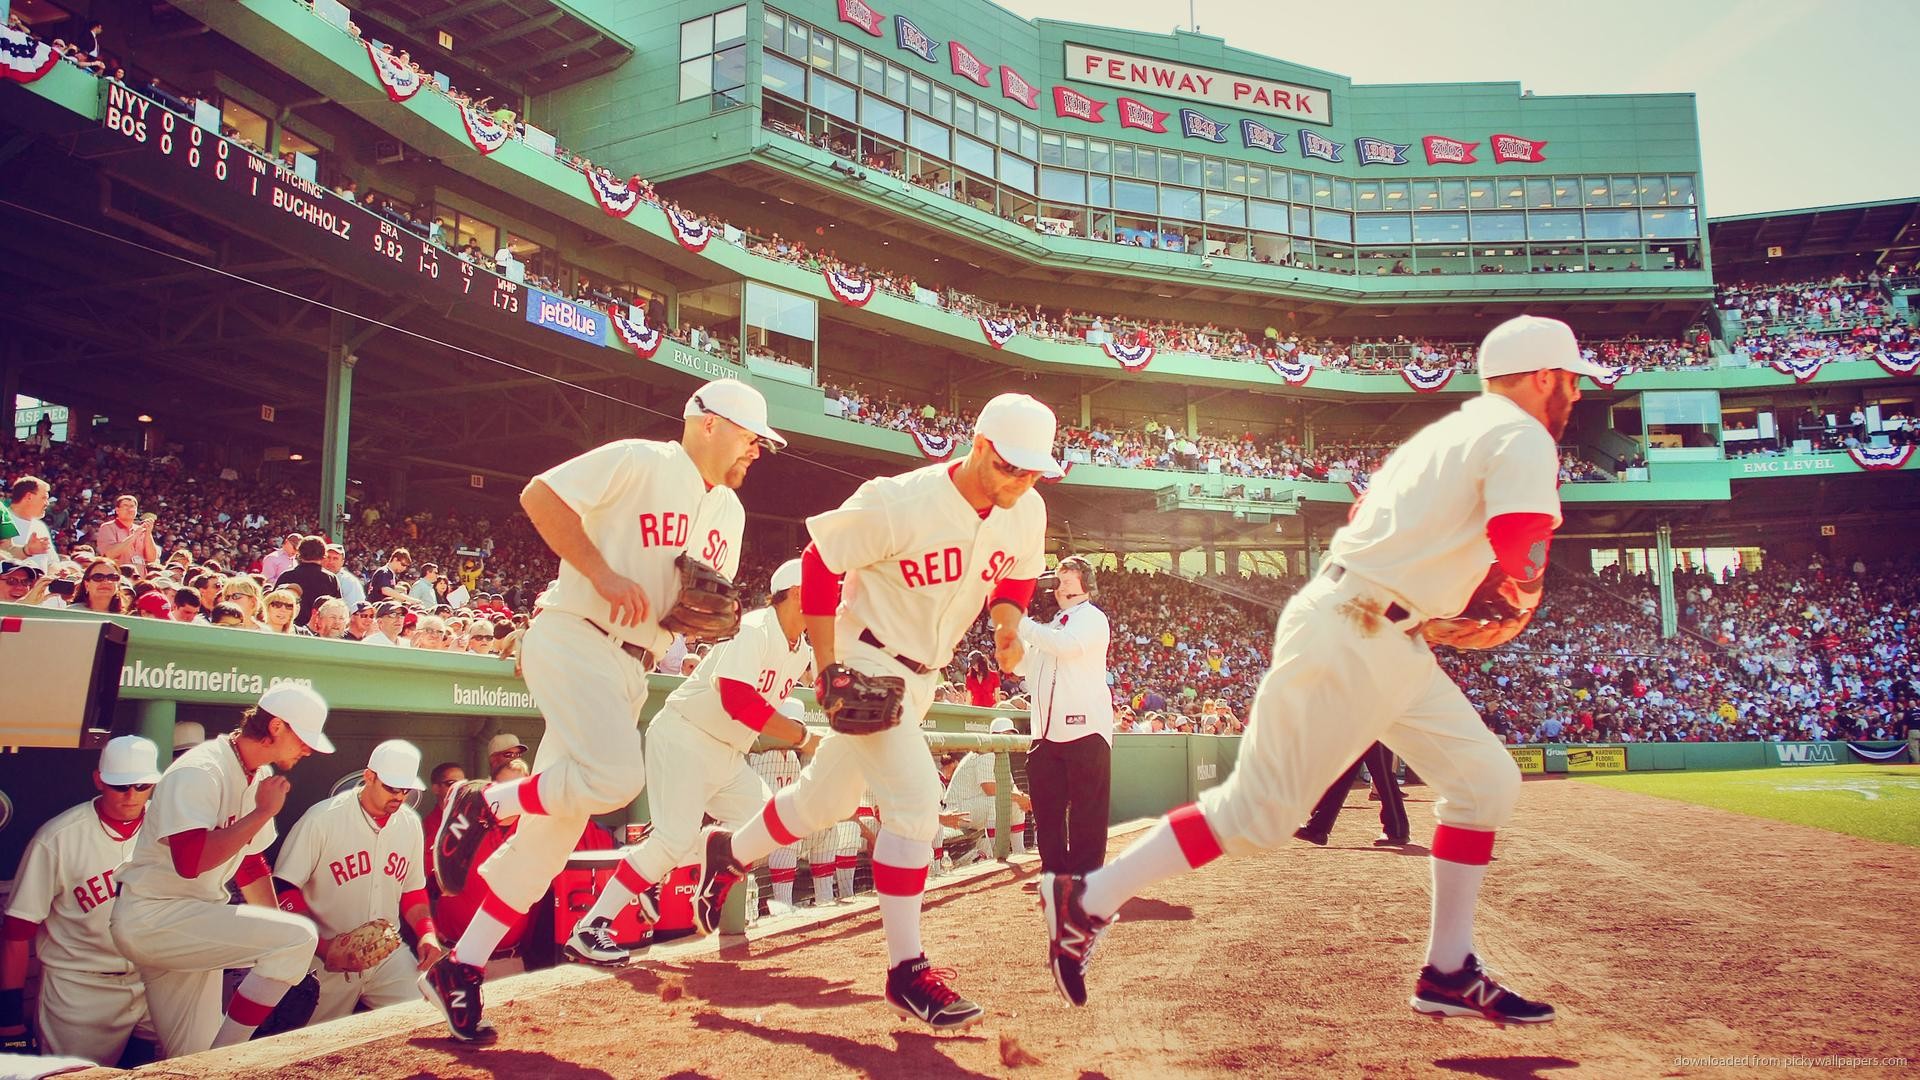 1920x1080 Boston-Red-Sox-starting-the-game-picture